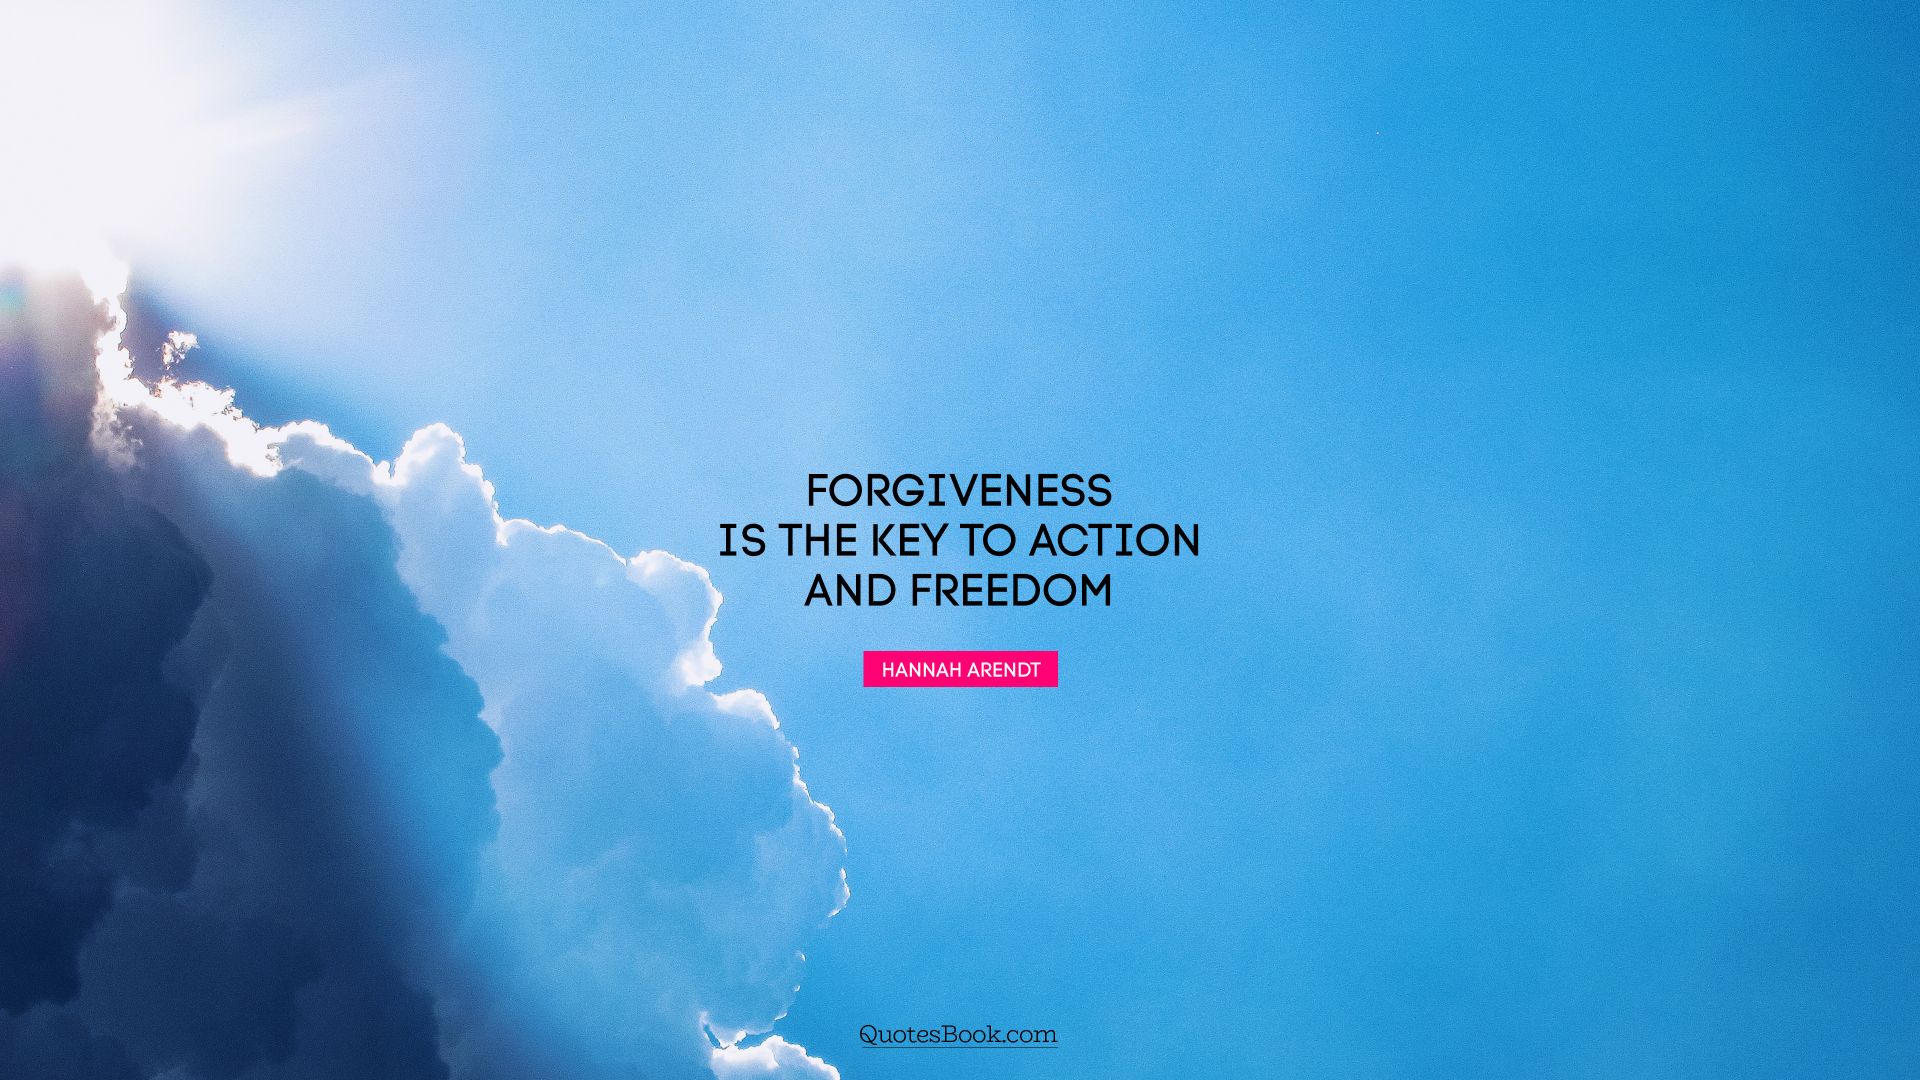 Forgiveness is the key to action and freedom. - Quote by Hannah Arendt